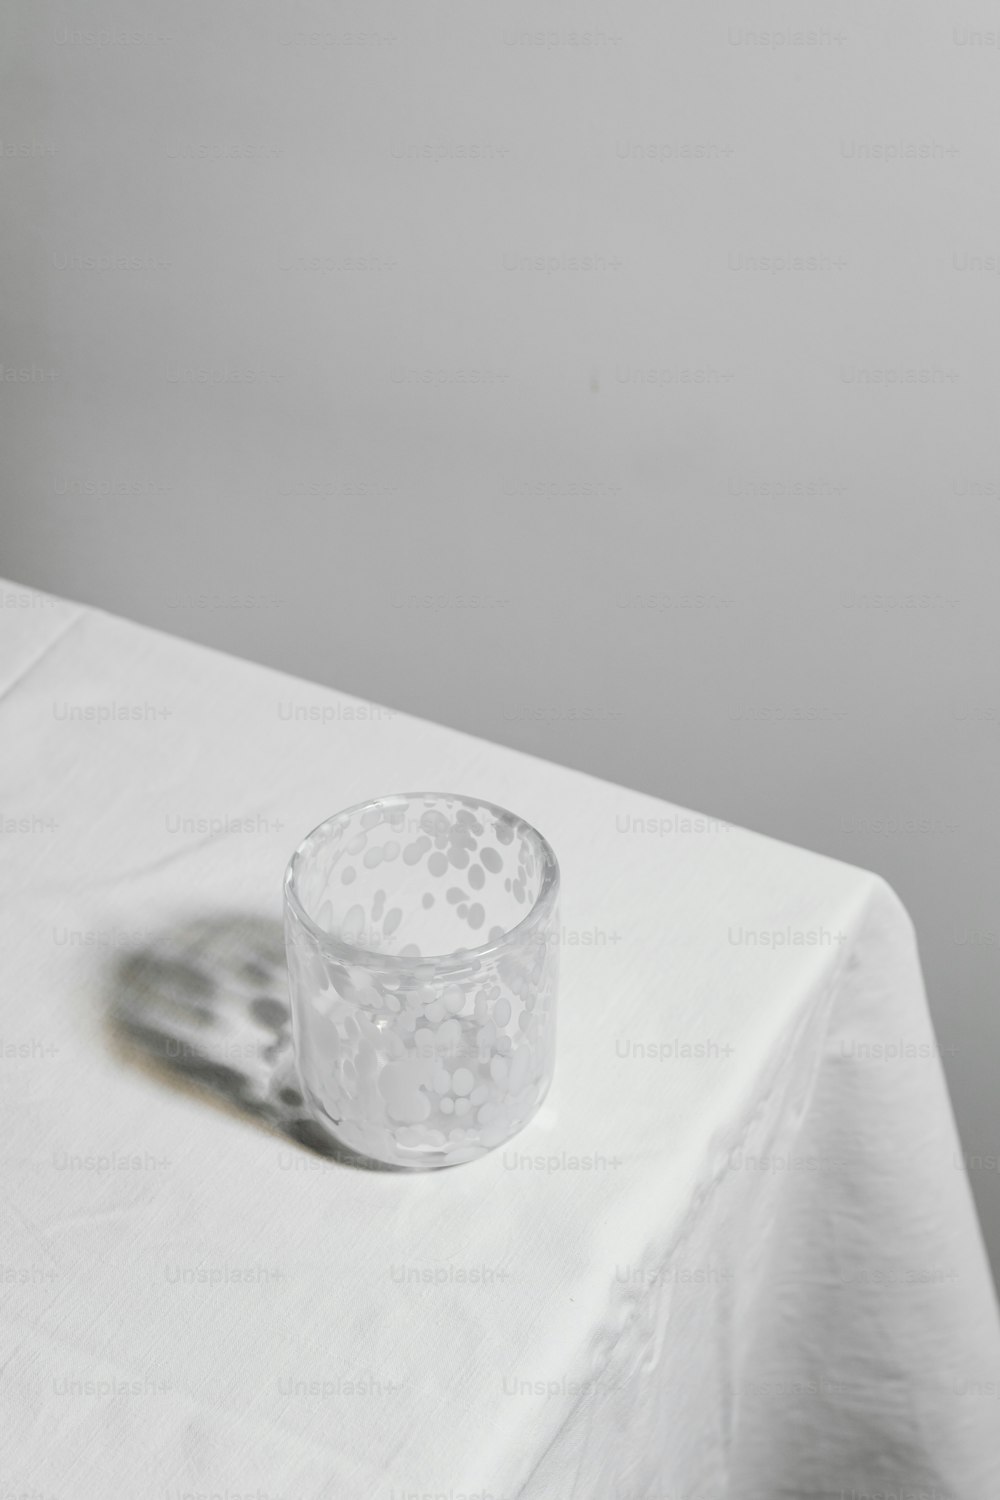 a glass sitting on top of a white table